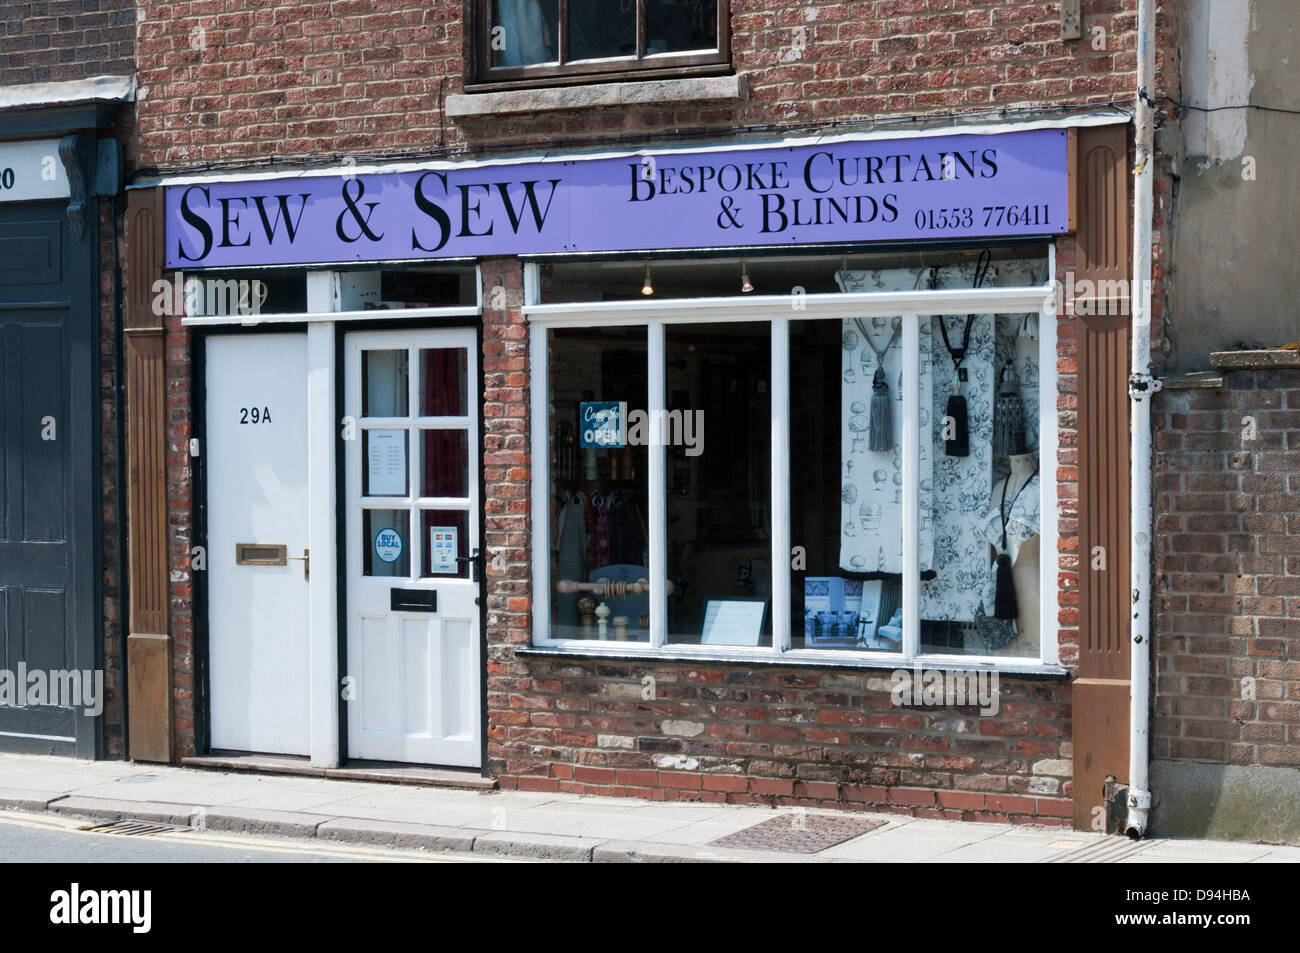 Sew & Sew curtains and blinds shop in King's Lynn. Stock Photo